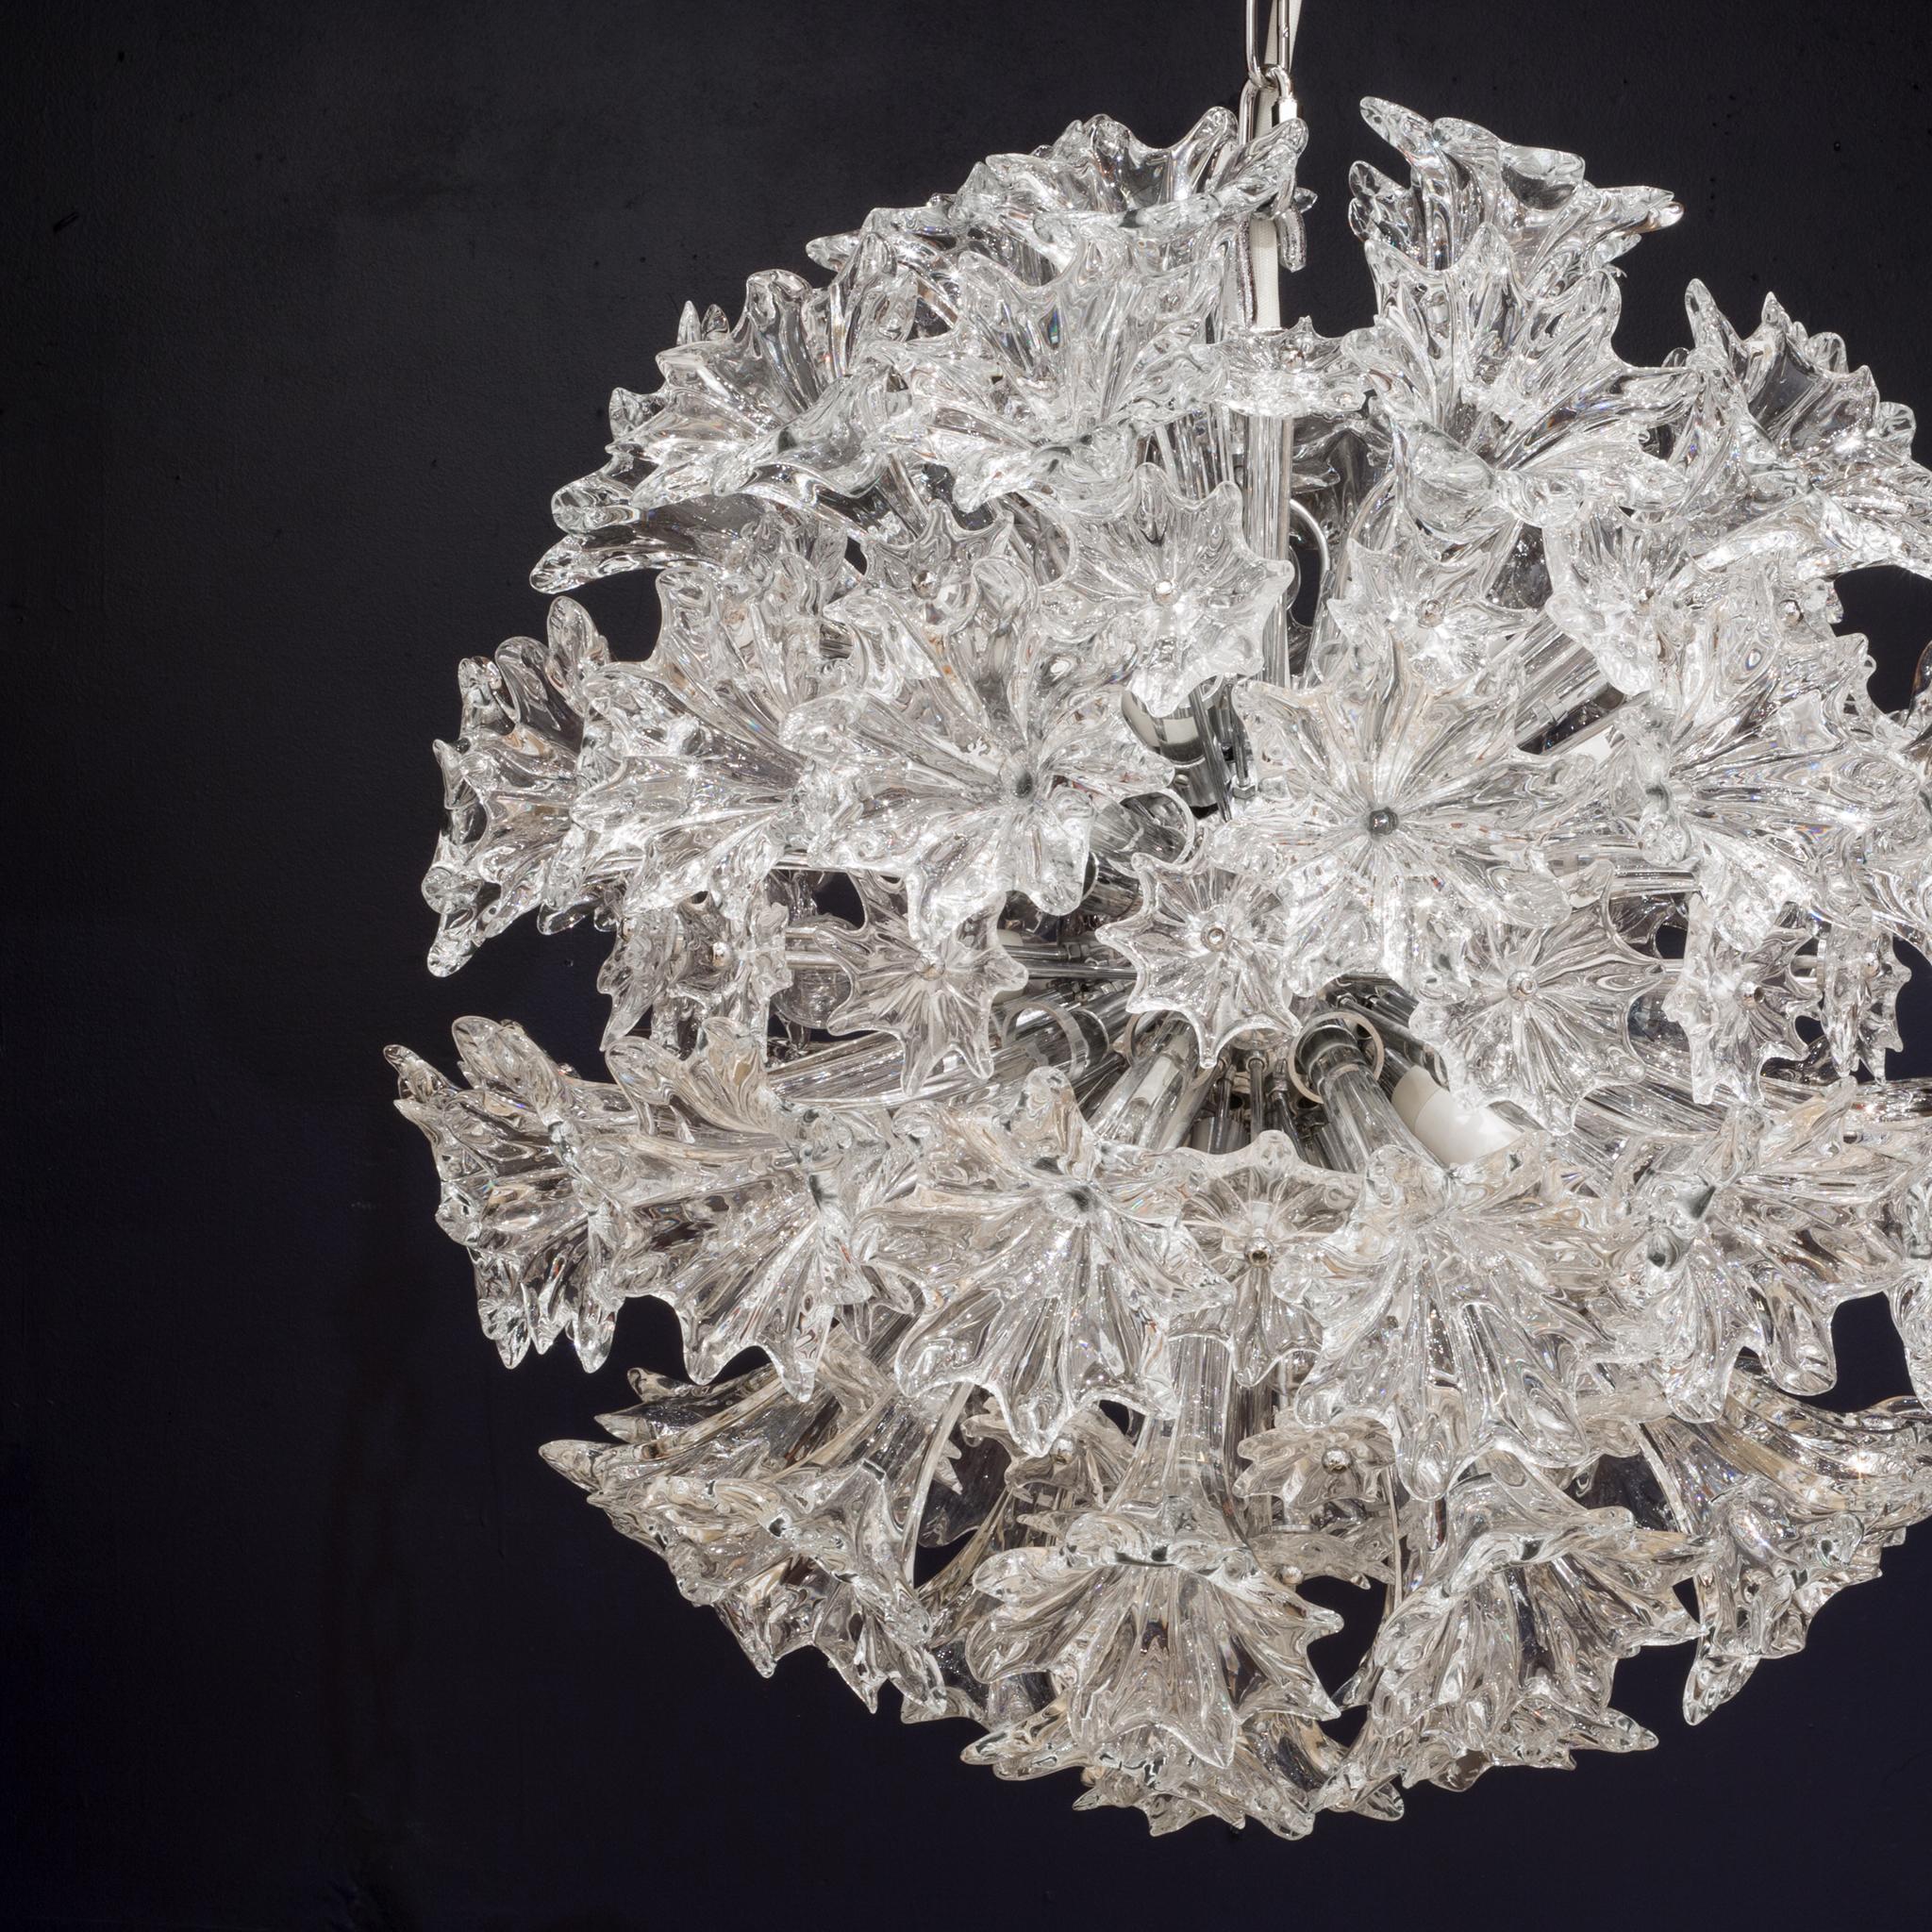 About

The Esprit chandelier was first produced by Venini in the 1970s and offers an exciting combination of creative design and glass-making prowess, as well as groundbreaking development in lighting technology—creating a piece that remains at the